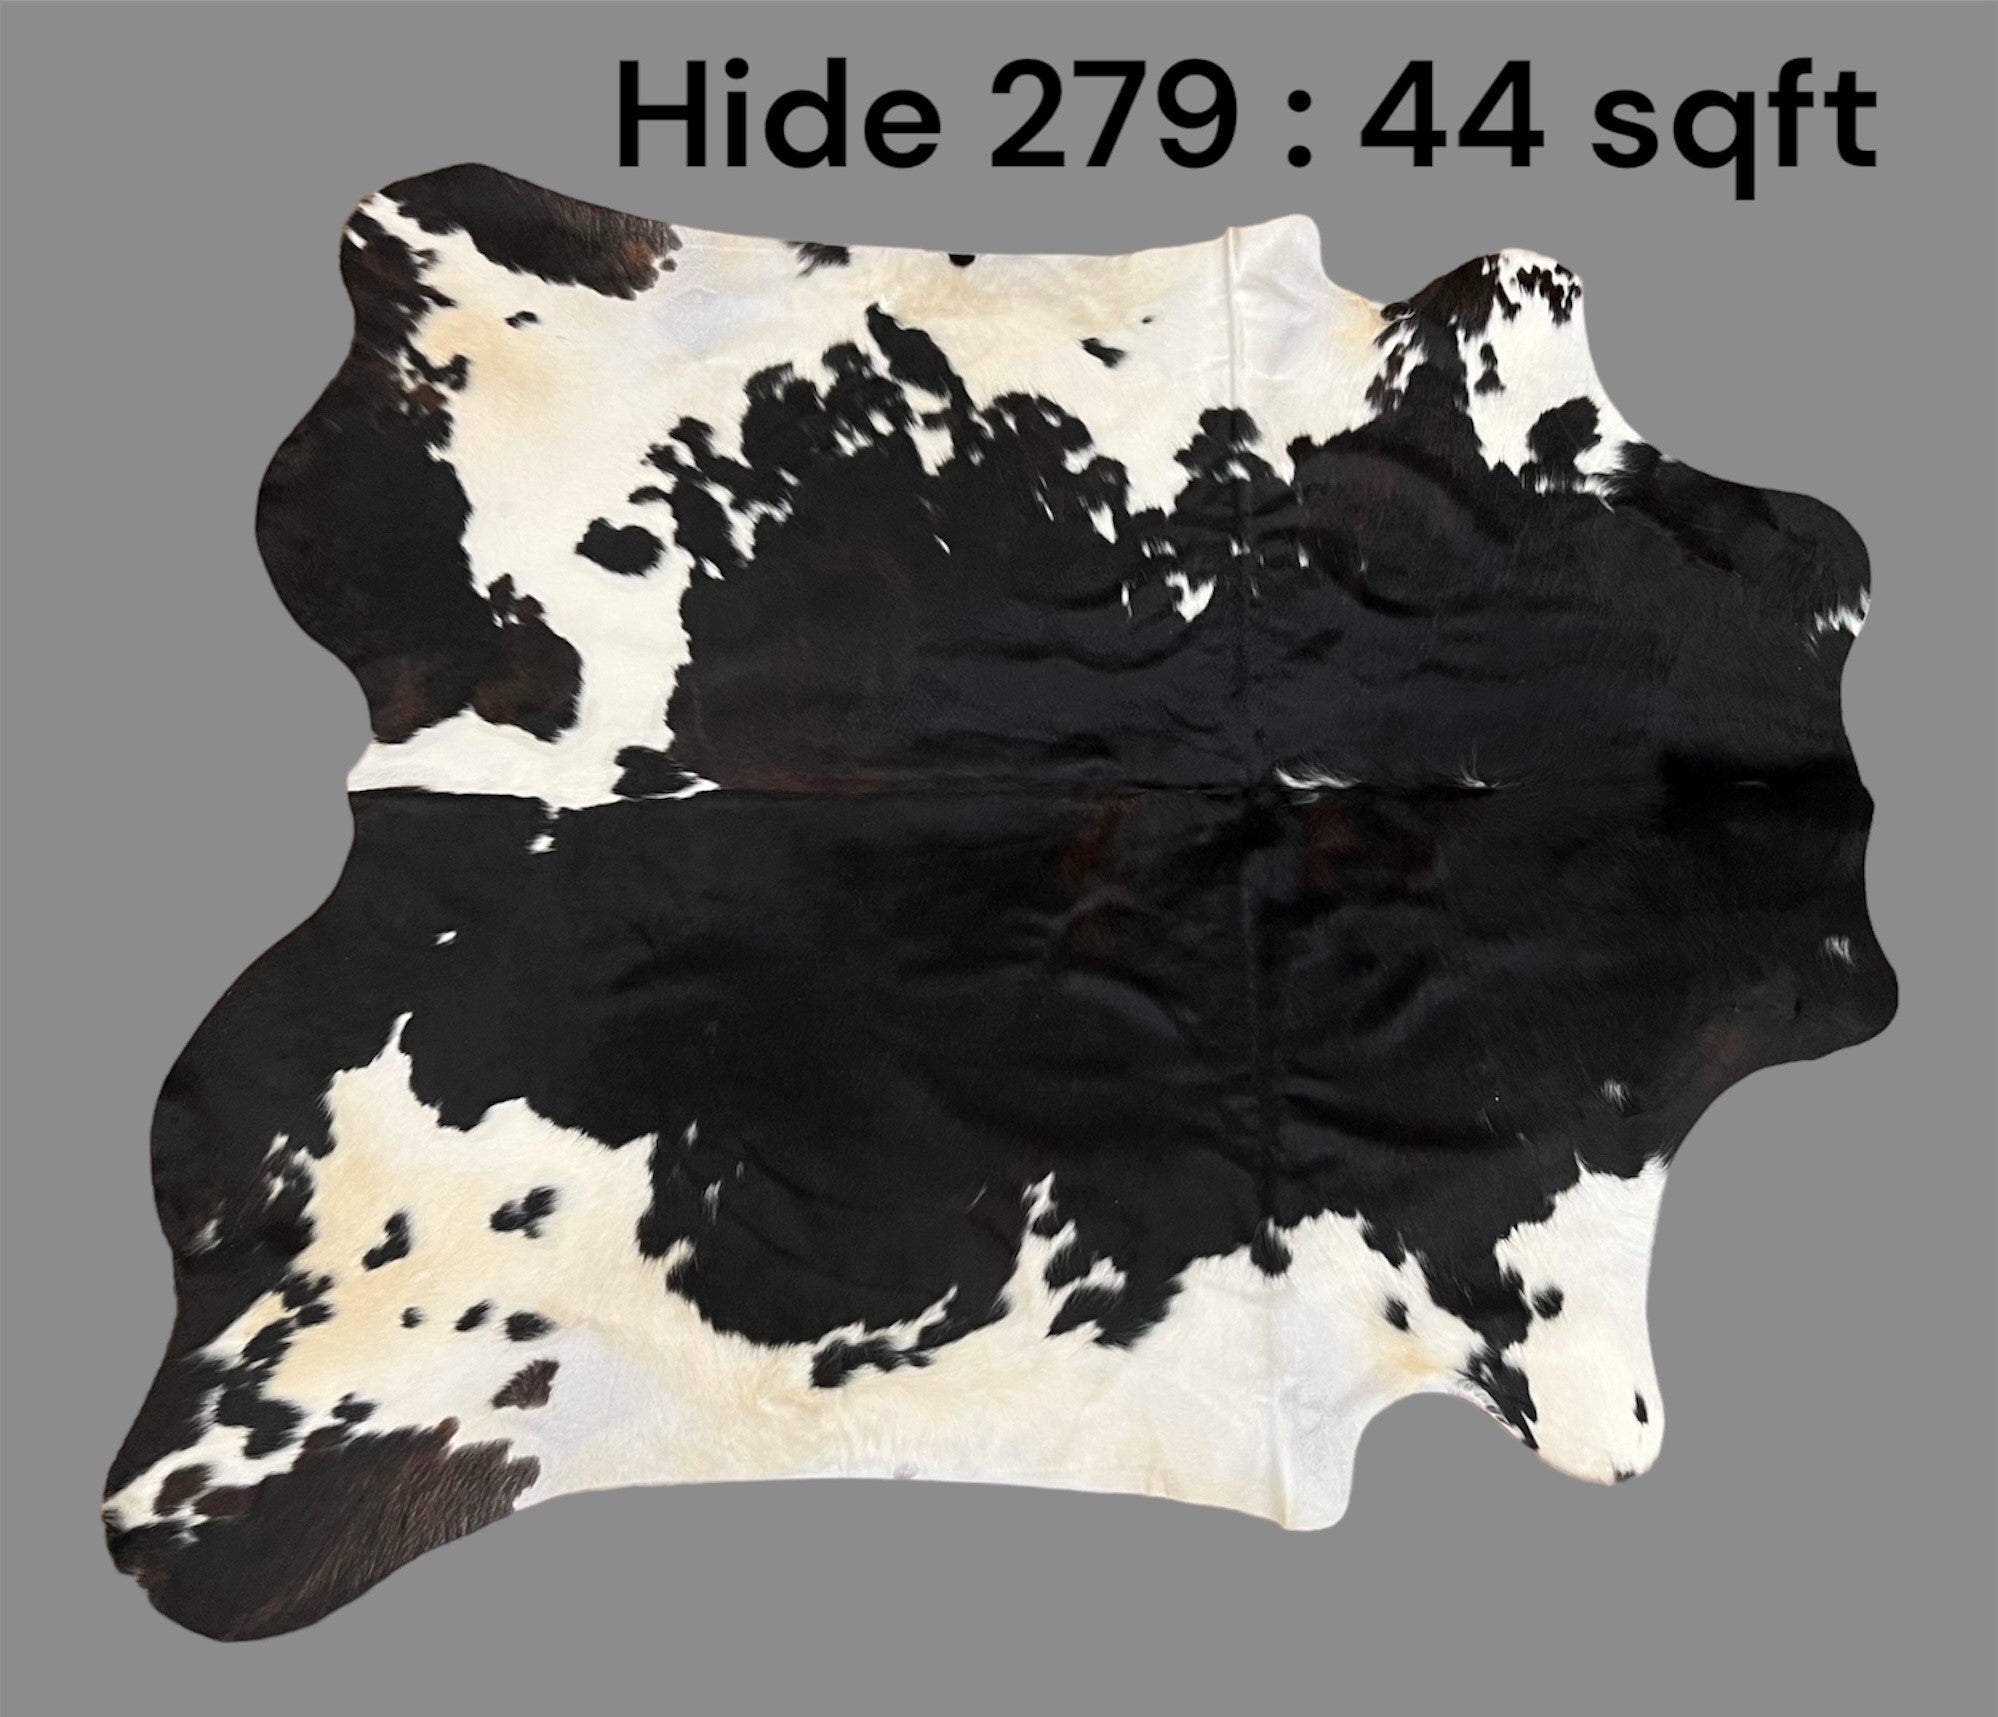 Natural Hair On Cow Hide : This Hide Is Perfect For Wall Hanging, Leather Rugs, Leather Upholstery & Leather Accessories. (Hide279)